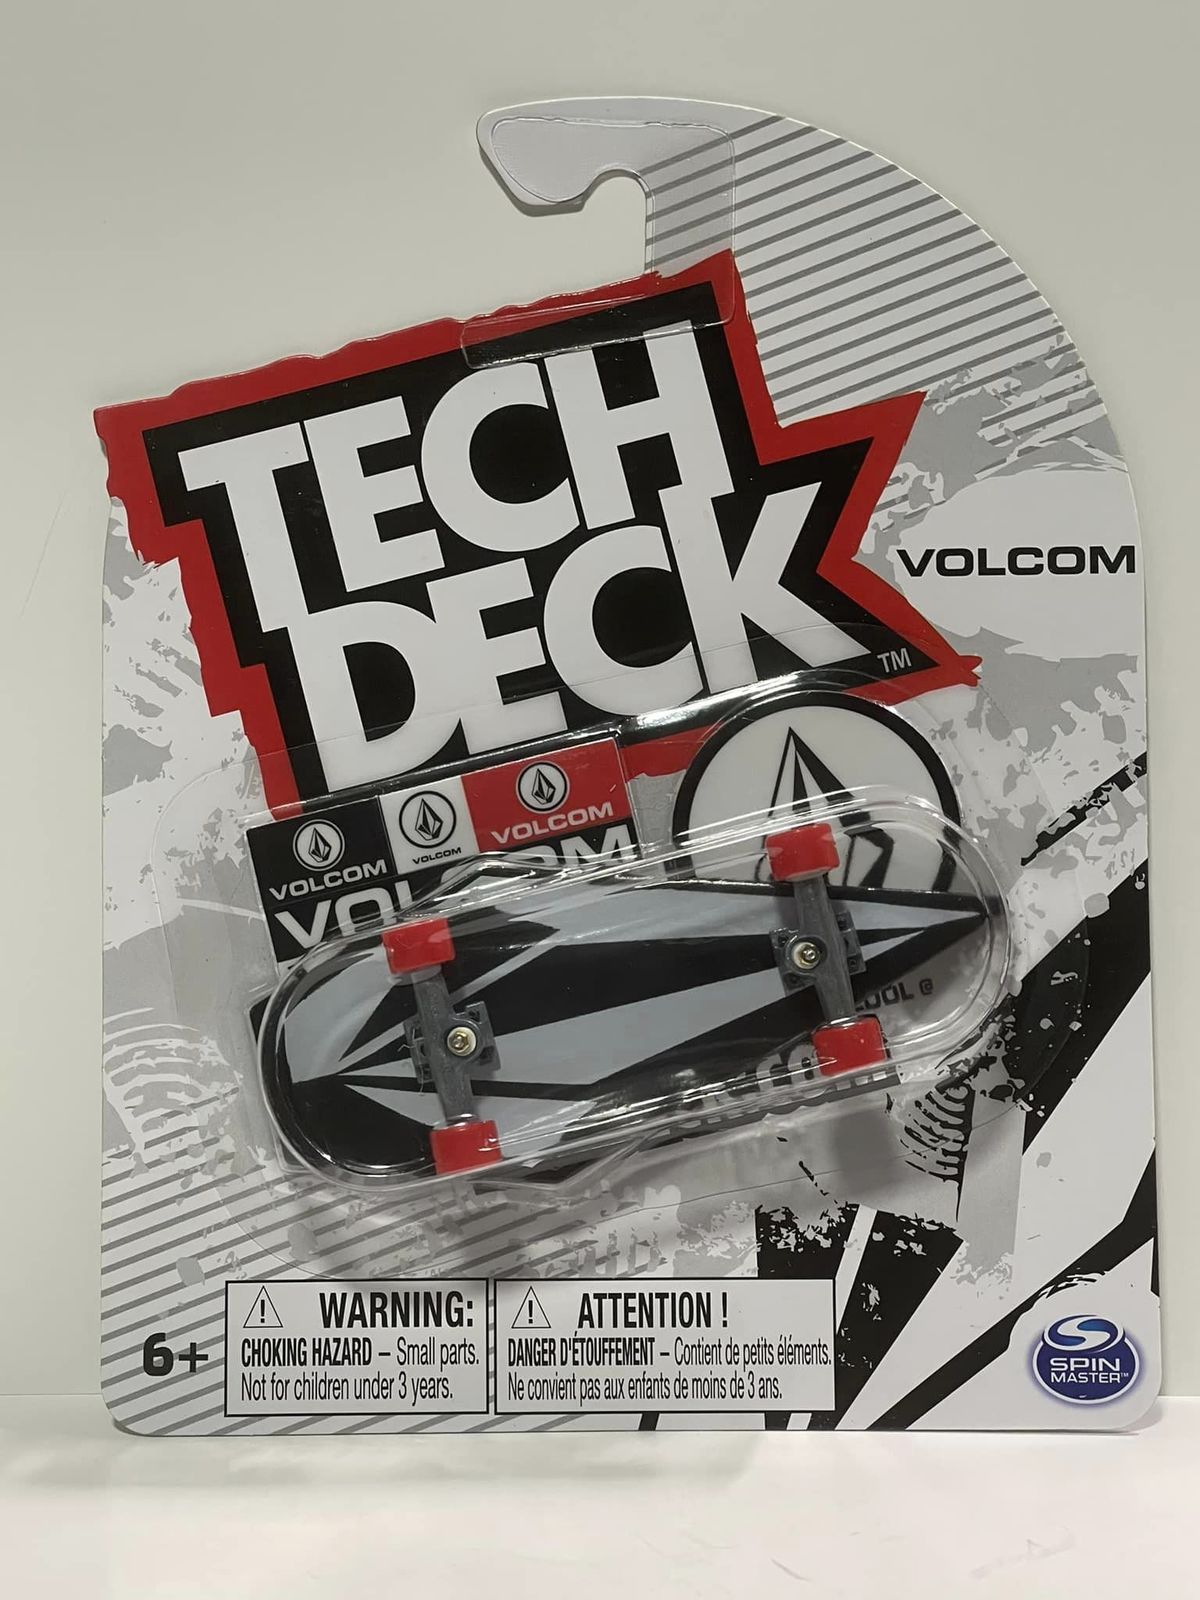 Primary image for TECH DECK - VOLCOM (Red Wheels) - Ultra Rare - 96mm Fingerboard 